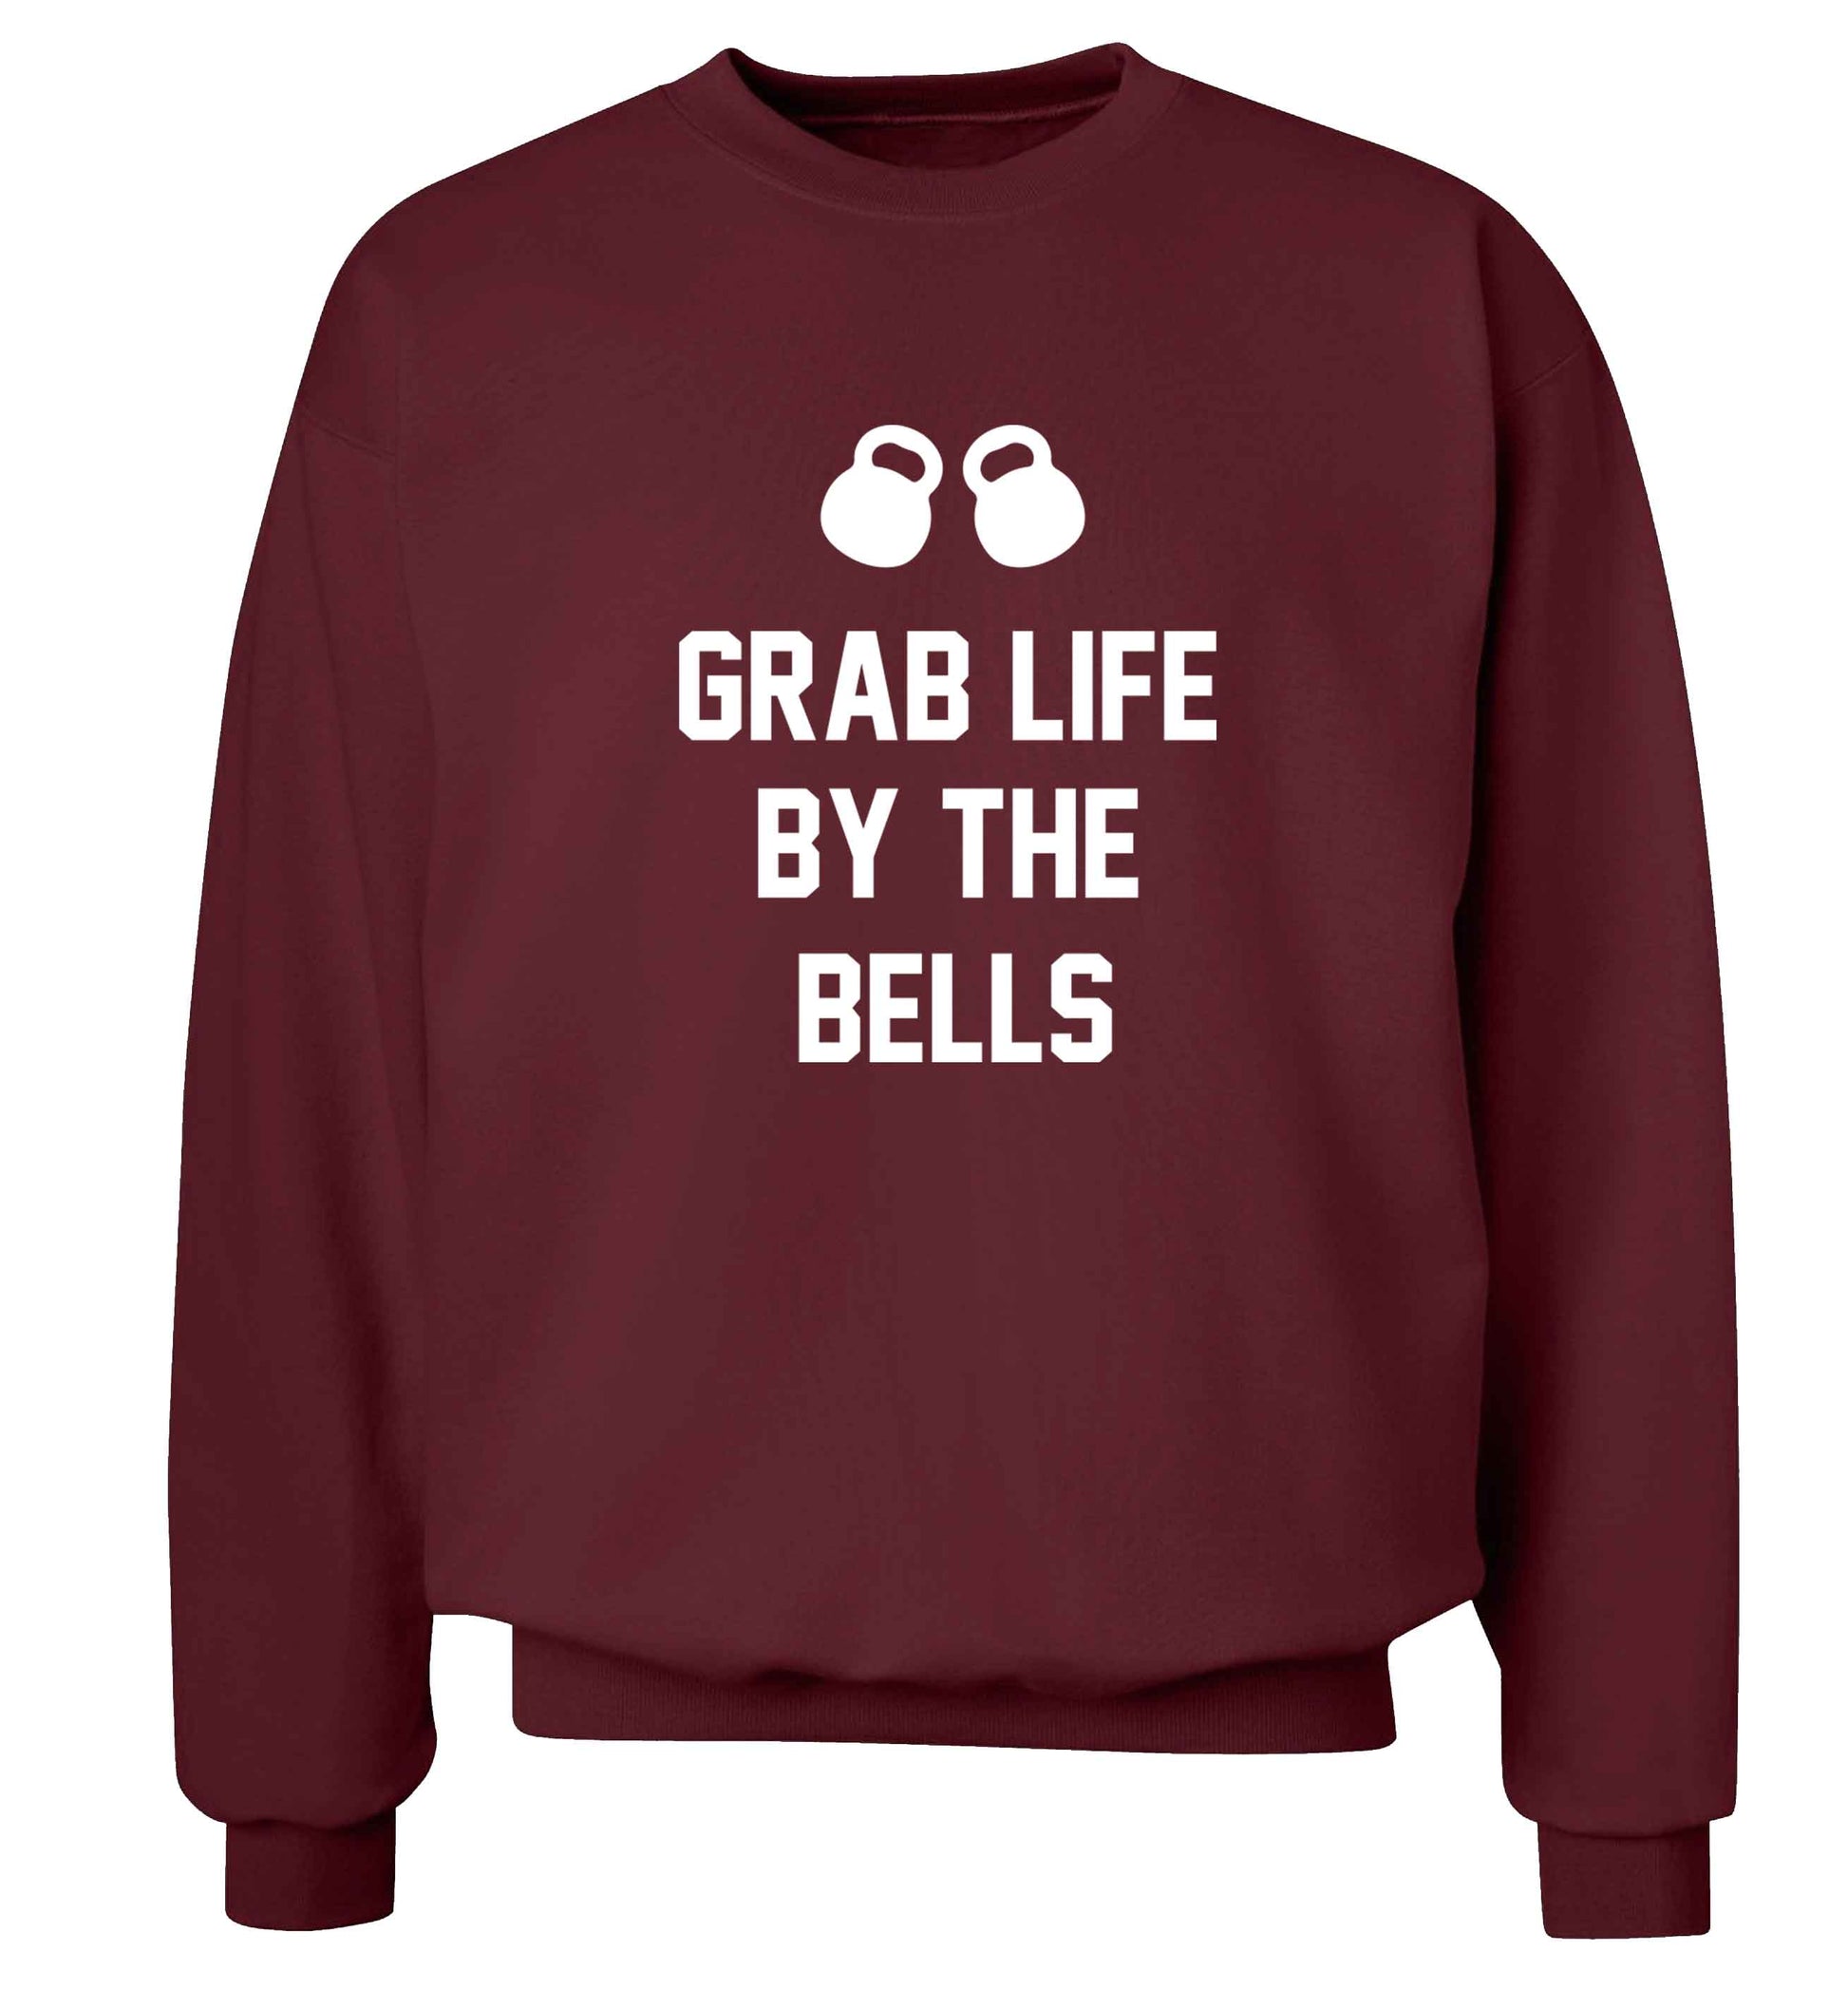 Grab life by the bells adult's unisex maroon sweater 2XL